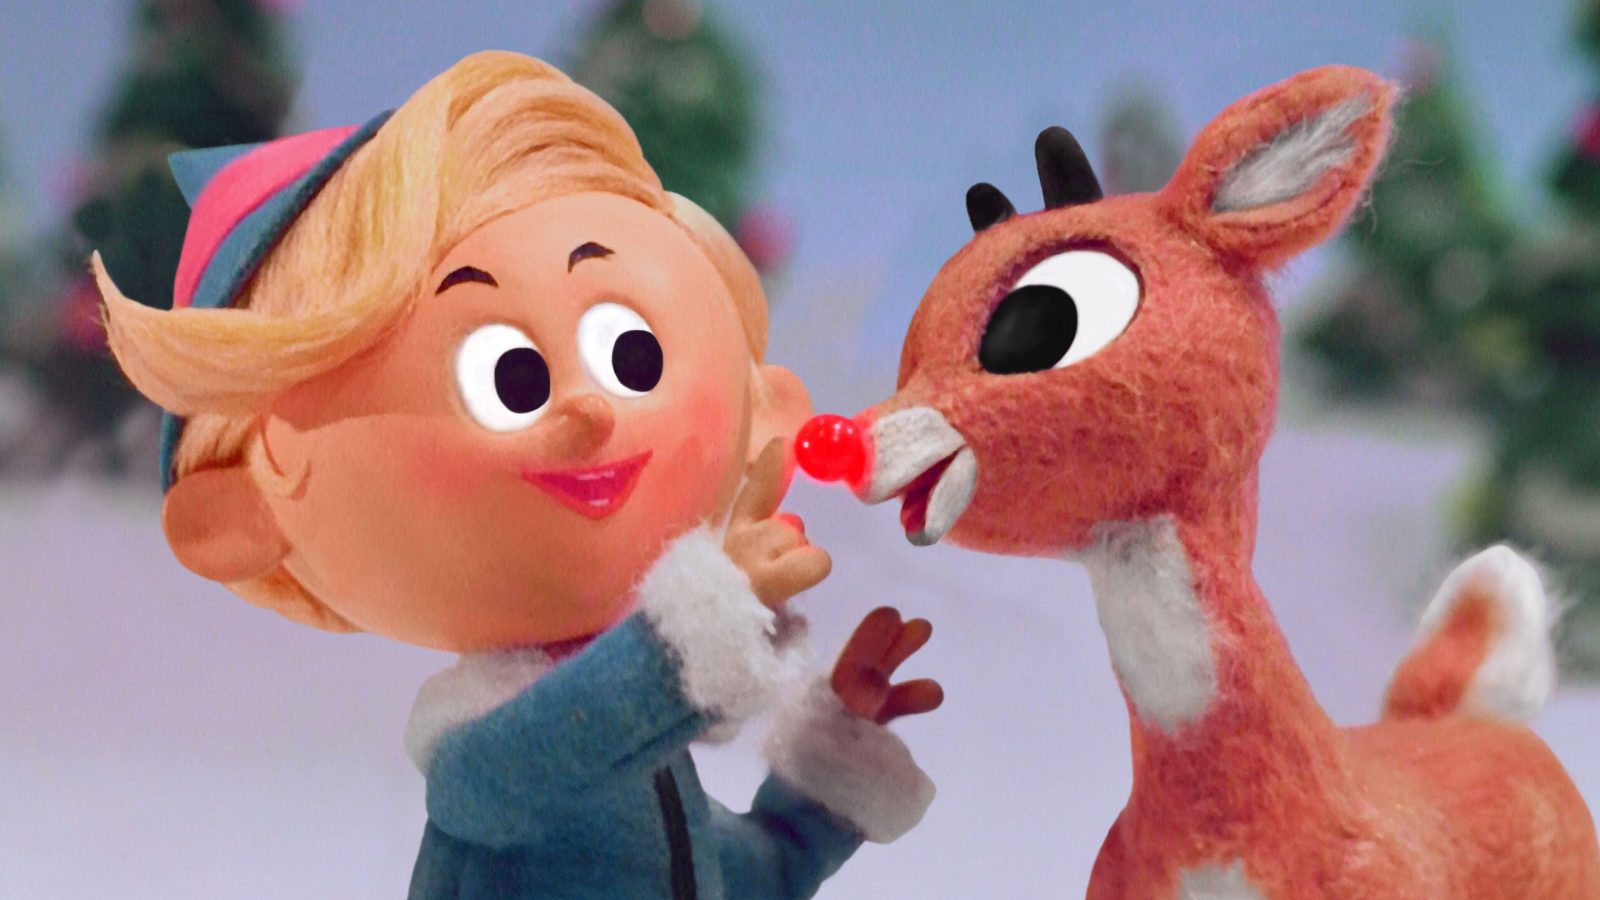 Silver Trivia Quiz Rudolph the Red-Nosed Reindeer